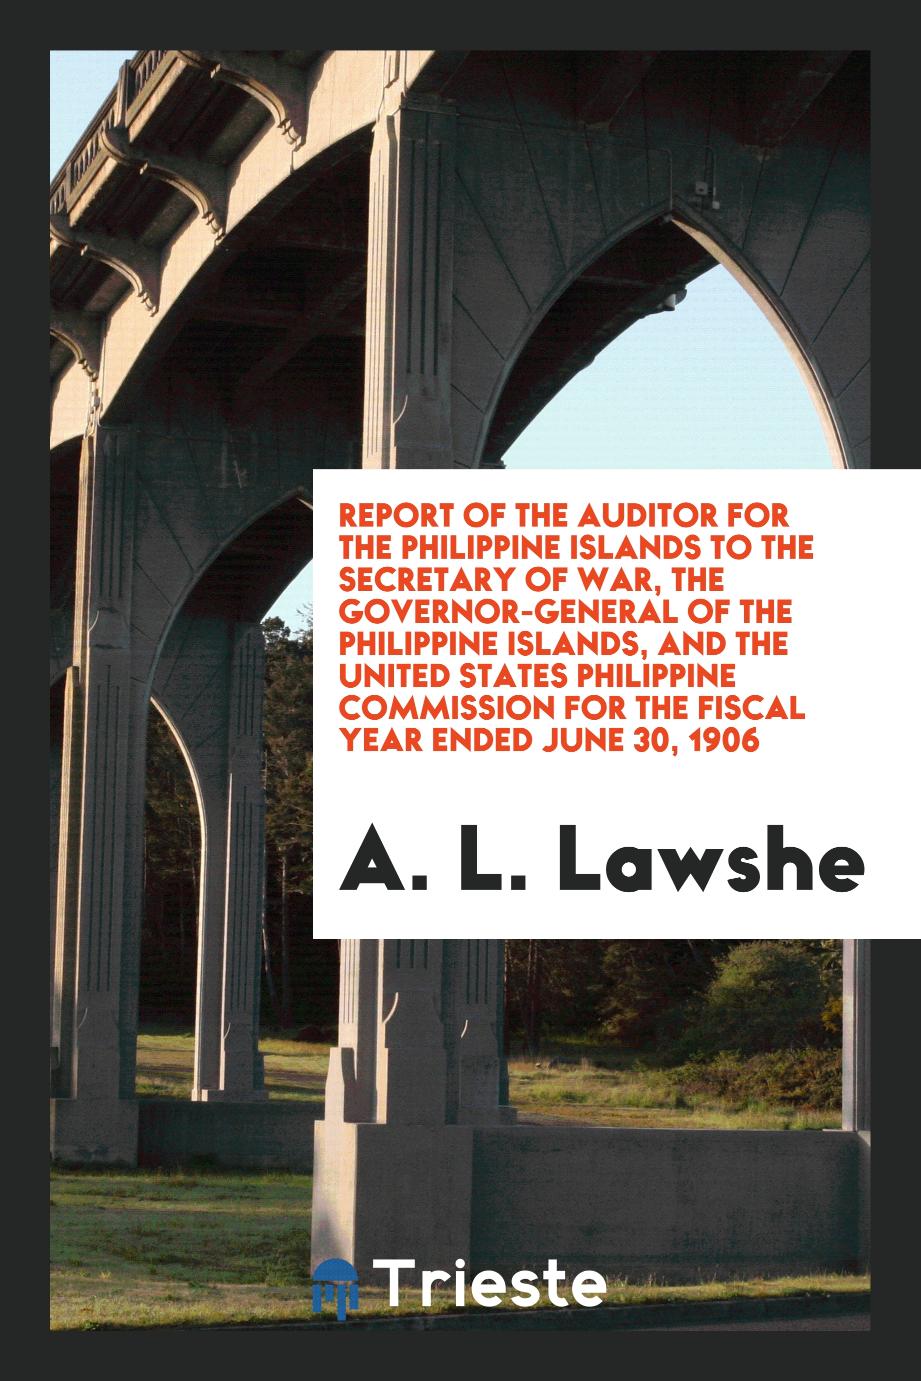 Report of the Auditor for the Philippine Islands to the Secretary of War, the Governor-General of the Philippine Islands, and the United States Philippine Commission for the Fiscal Year Ended June 30, 1906